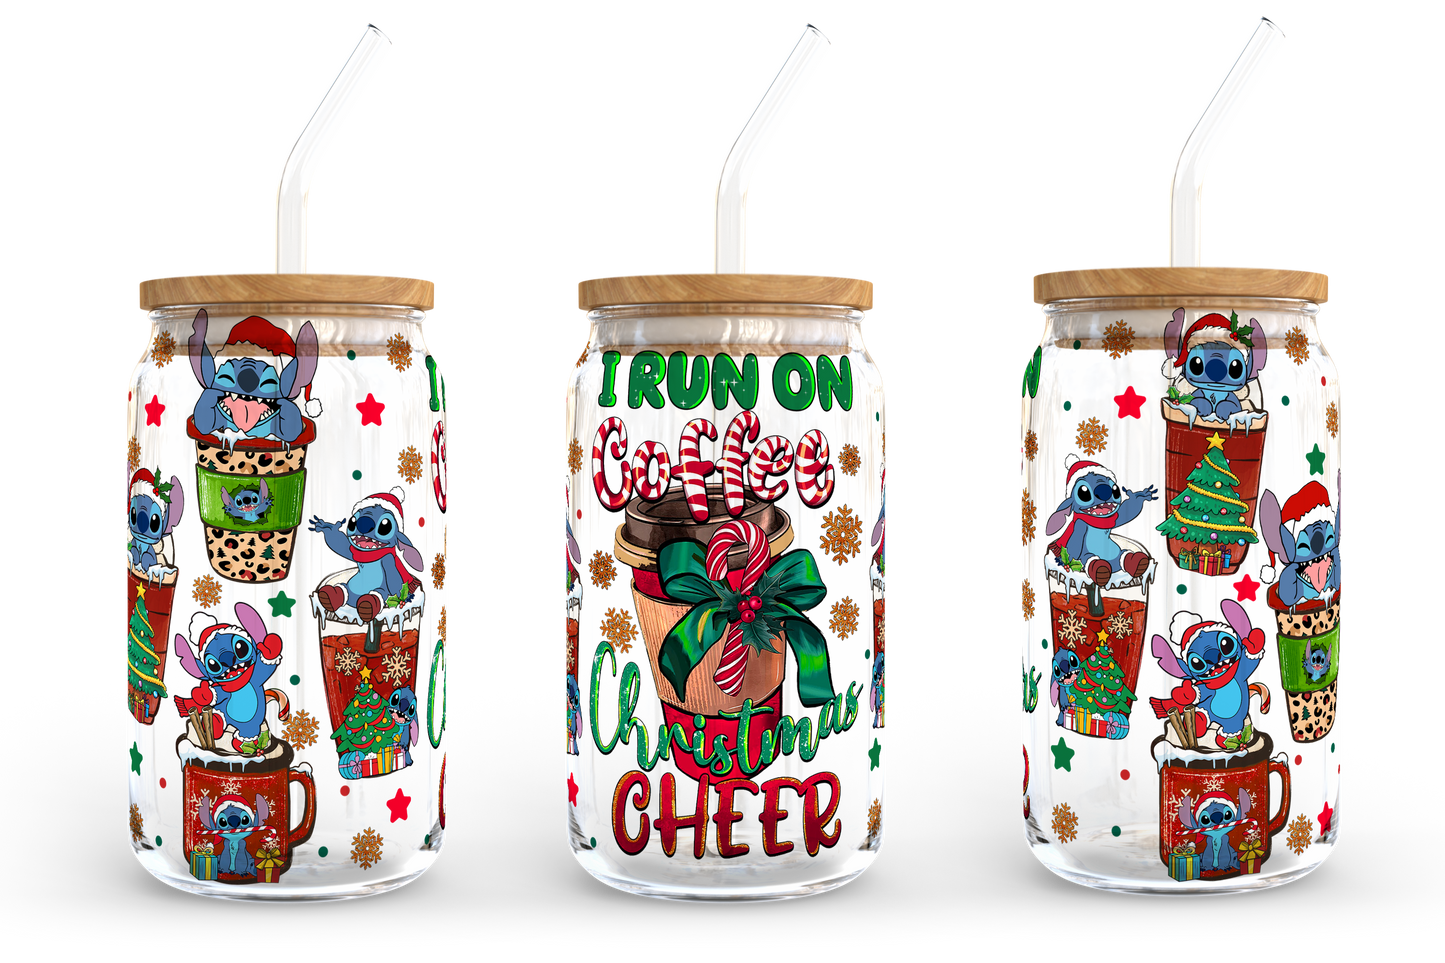 I Run On Coffee And Christmas Cheer 16oz Libbey Glass Can, Christmas Vibes Frosted Glass, Santa Claus Beer Can Glass, Retro Christmas Design